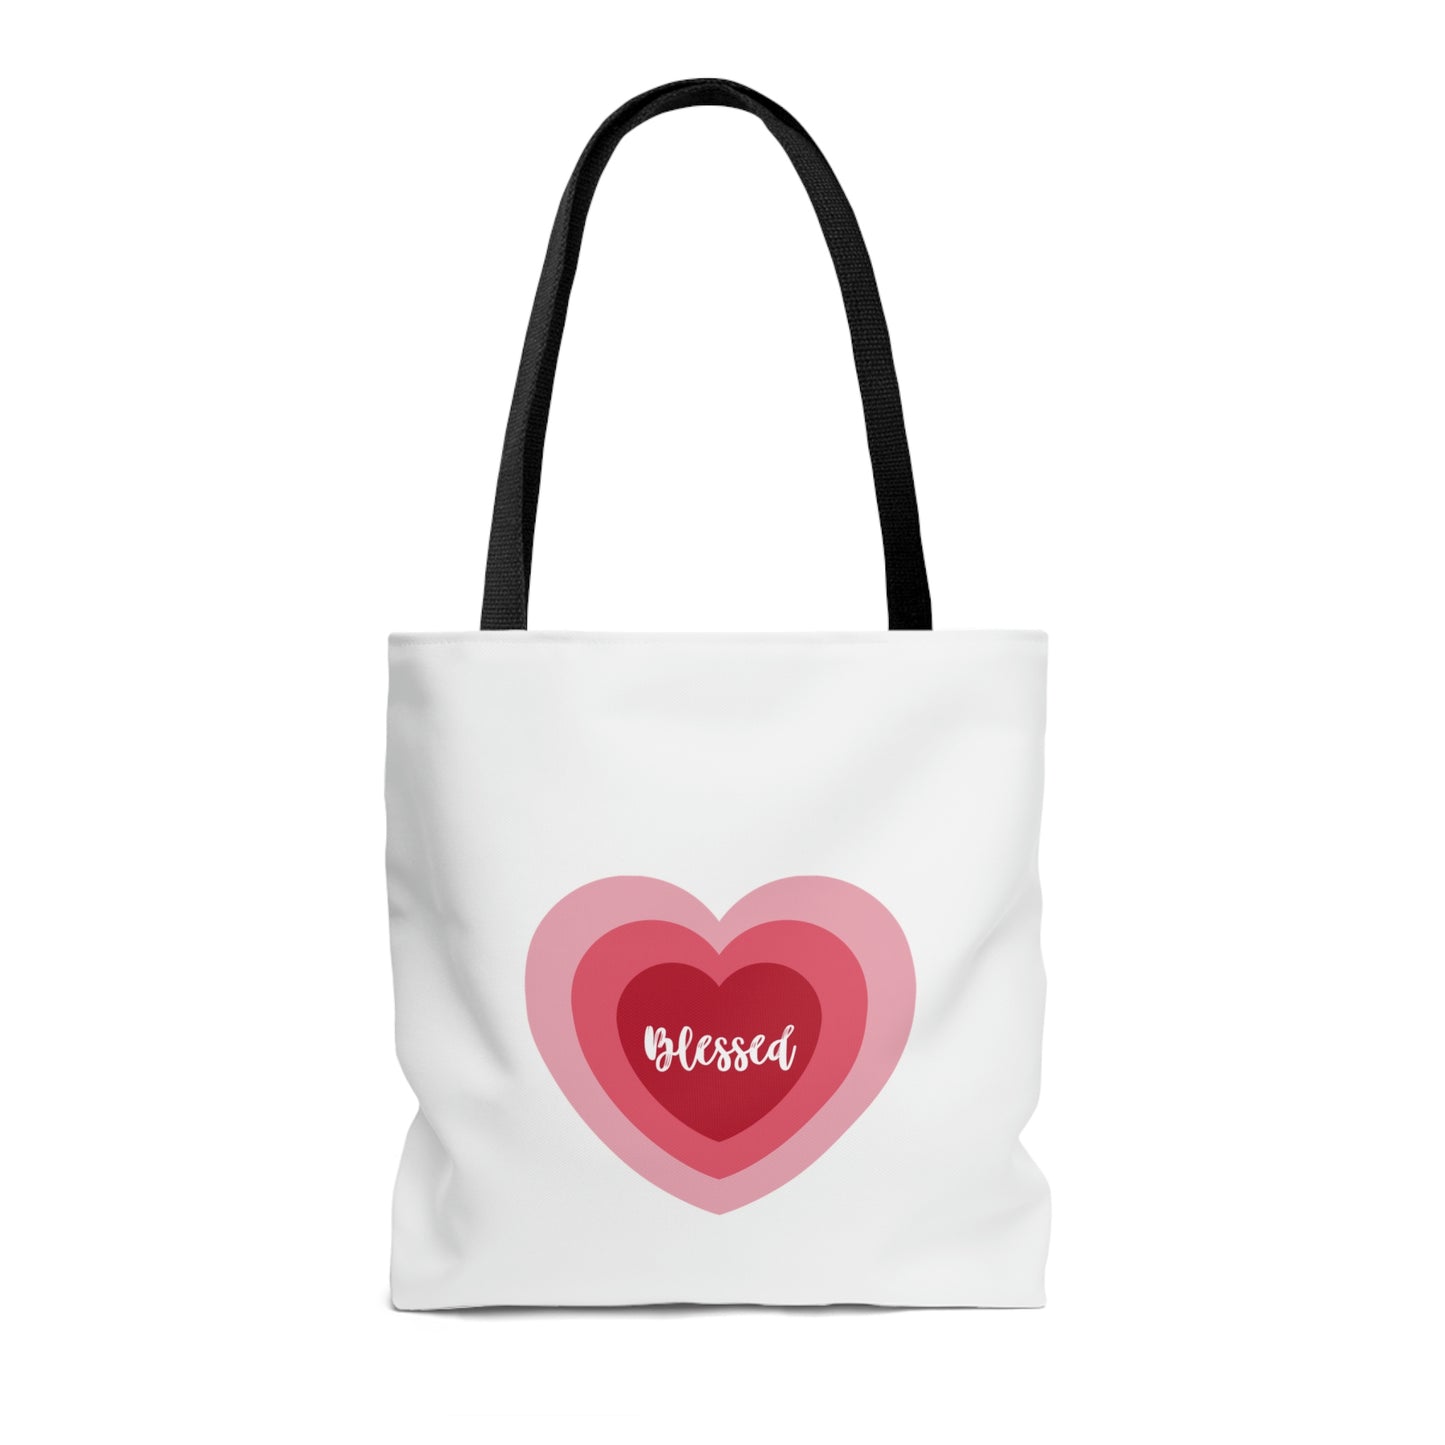 Blessed Heart Tote Bag